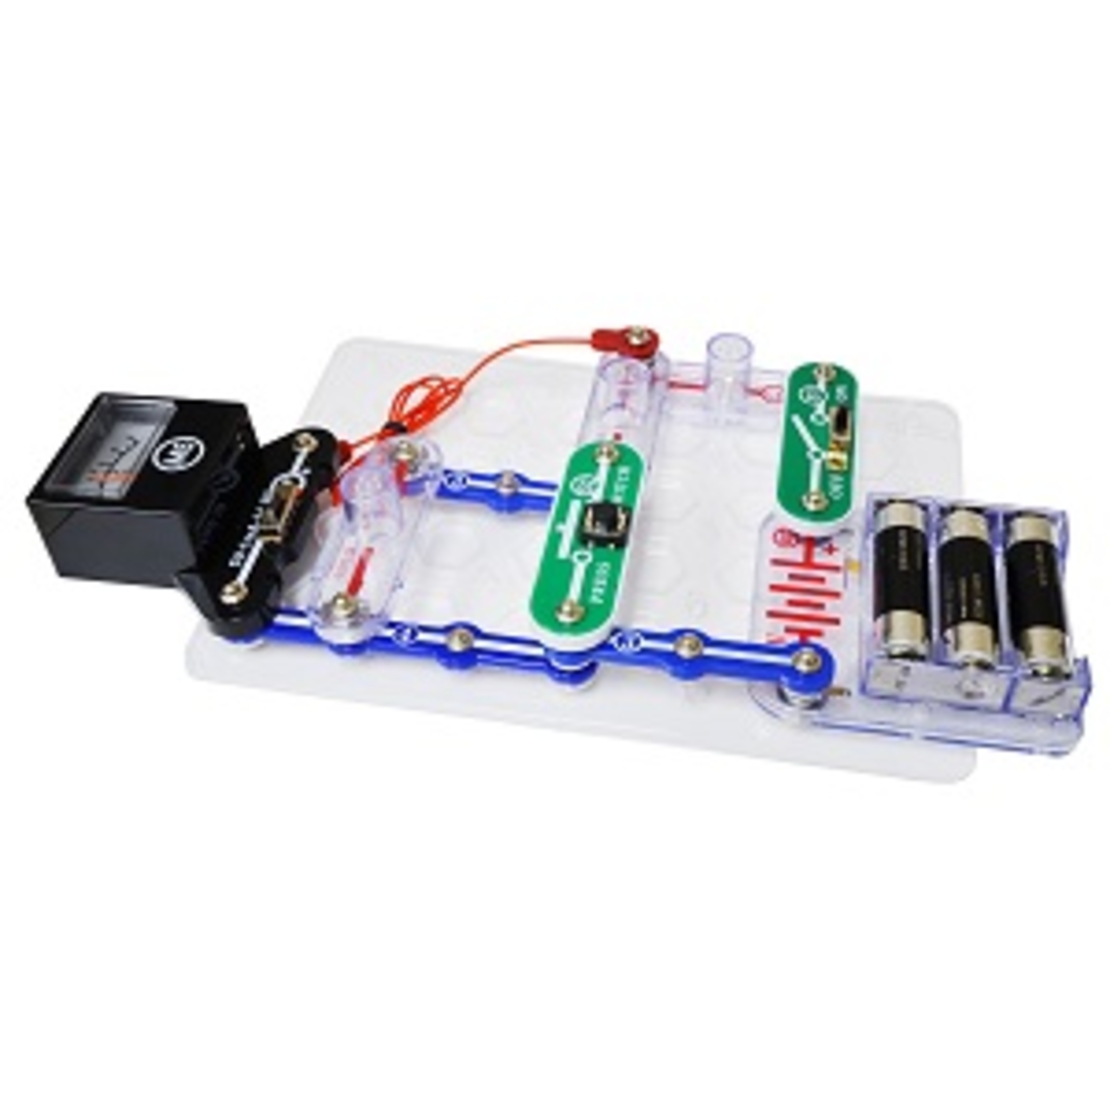 Snap Circuits SCP-10 Basic Electricity